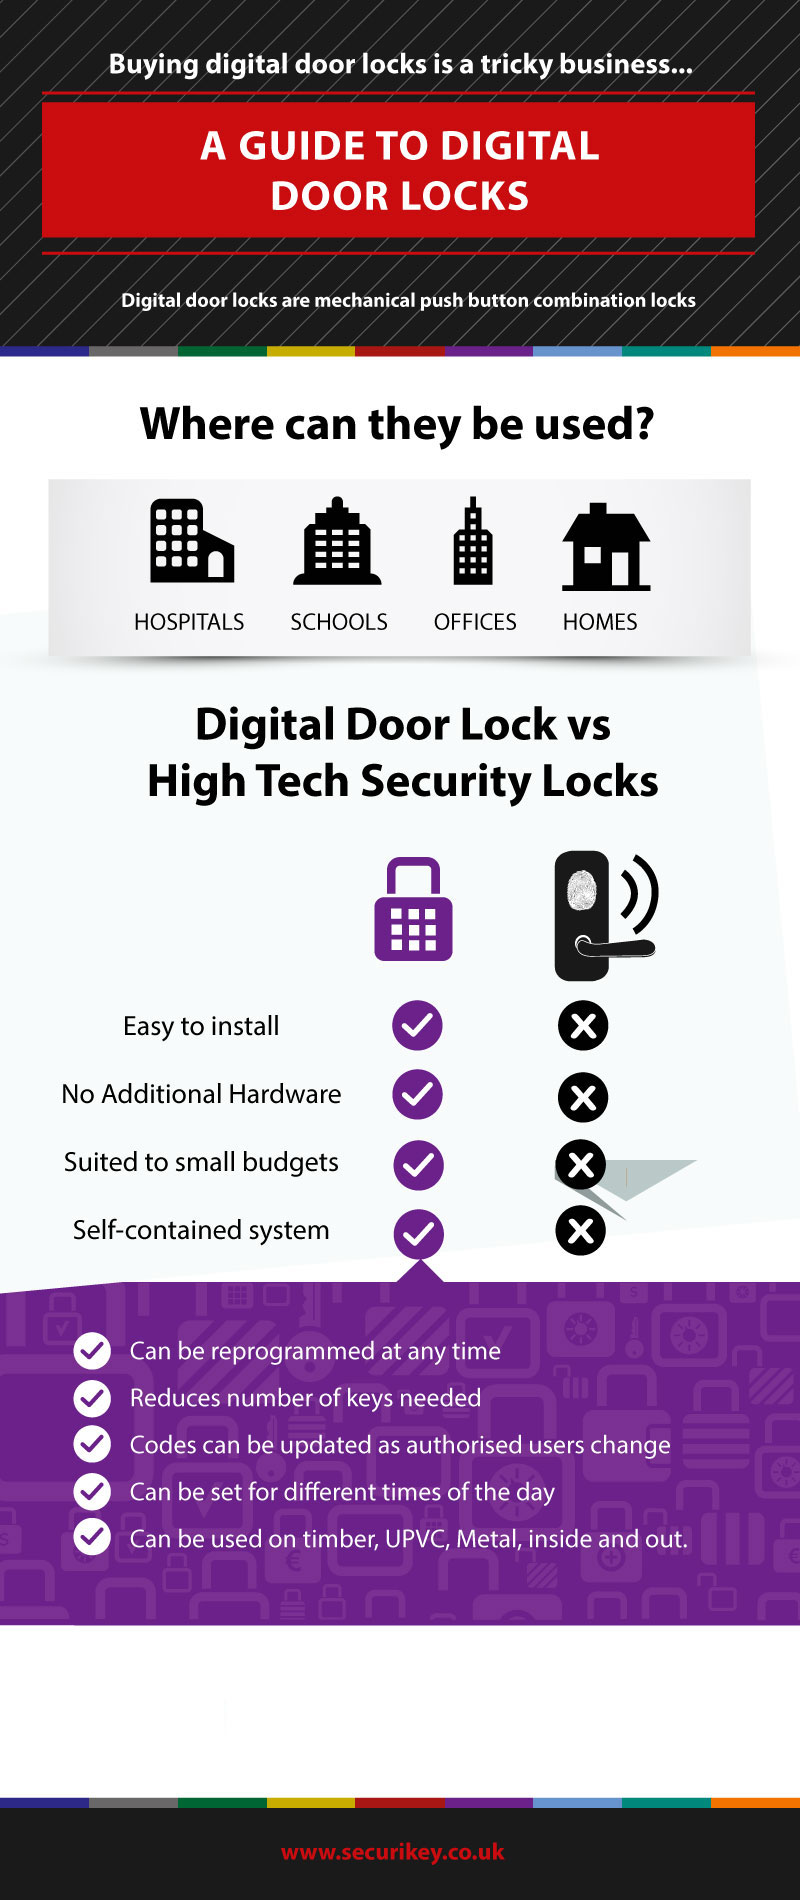 A Guide to Digital Door Locks Infographic